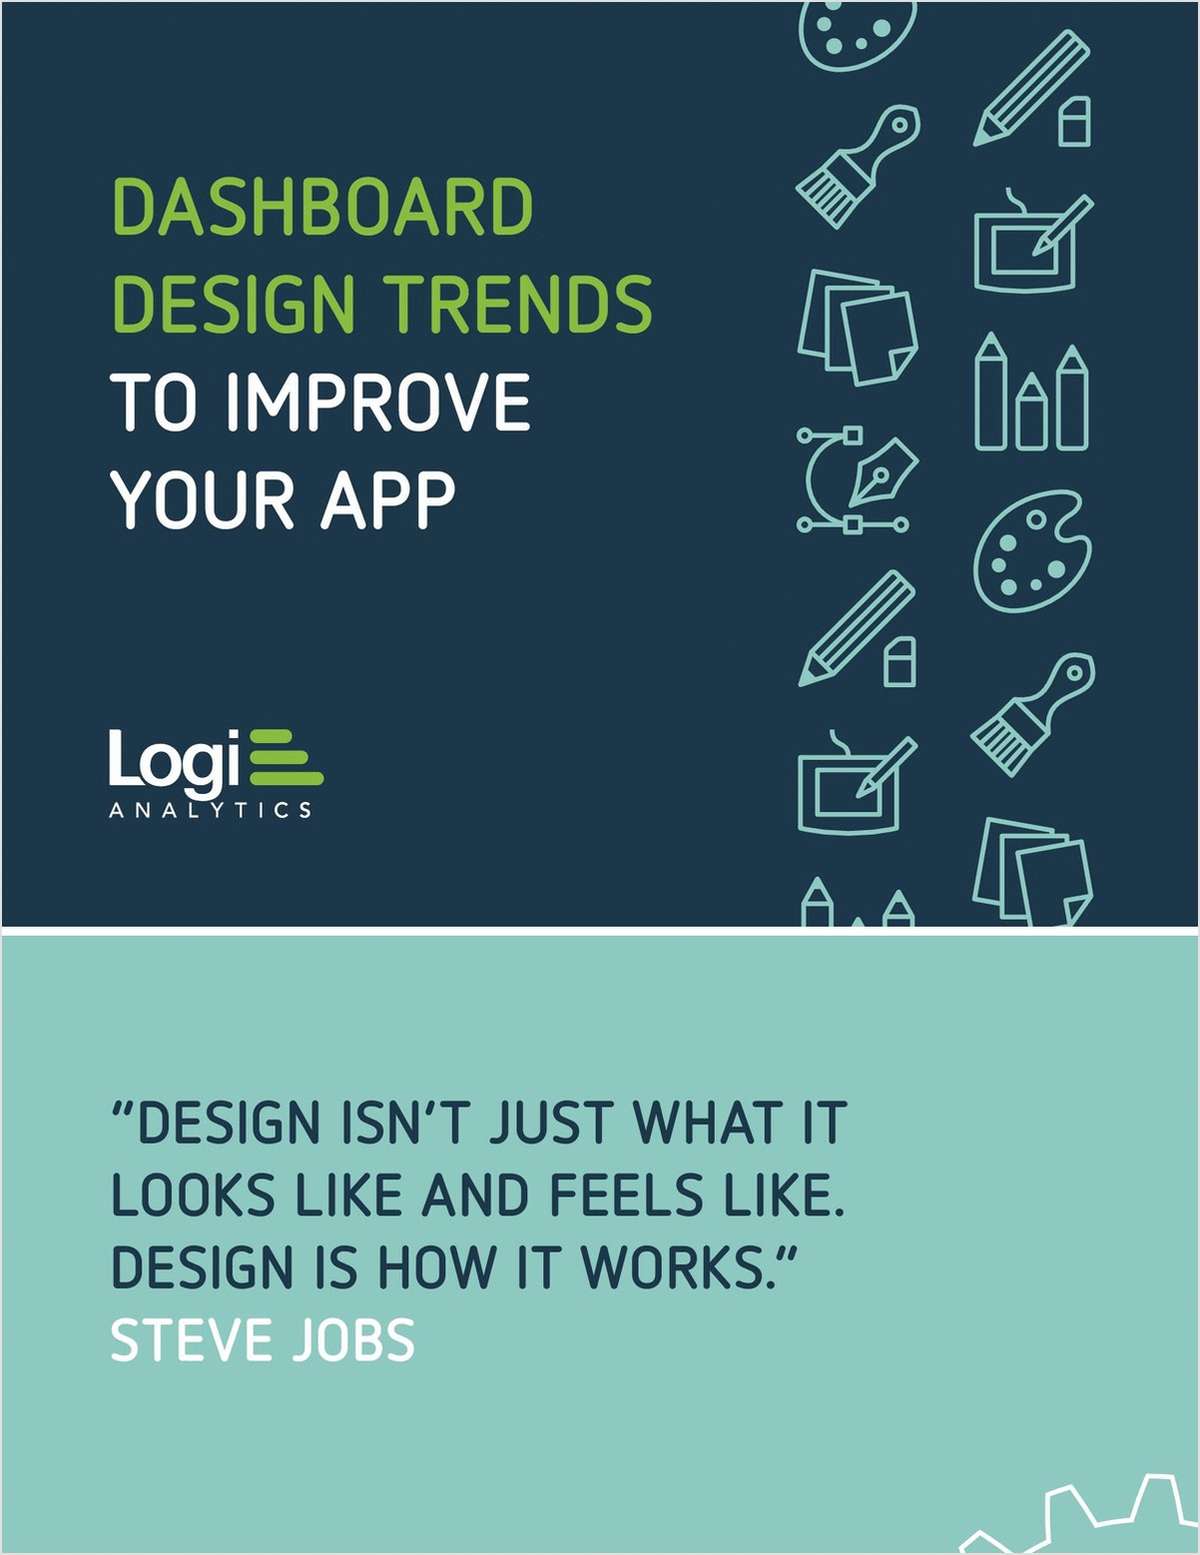 Dashboard Design Trends to Improve Your Application